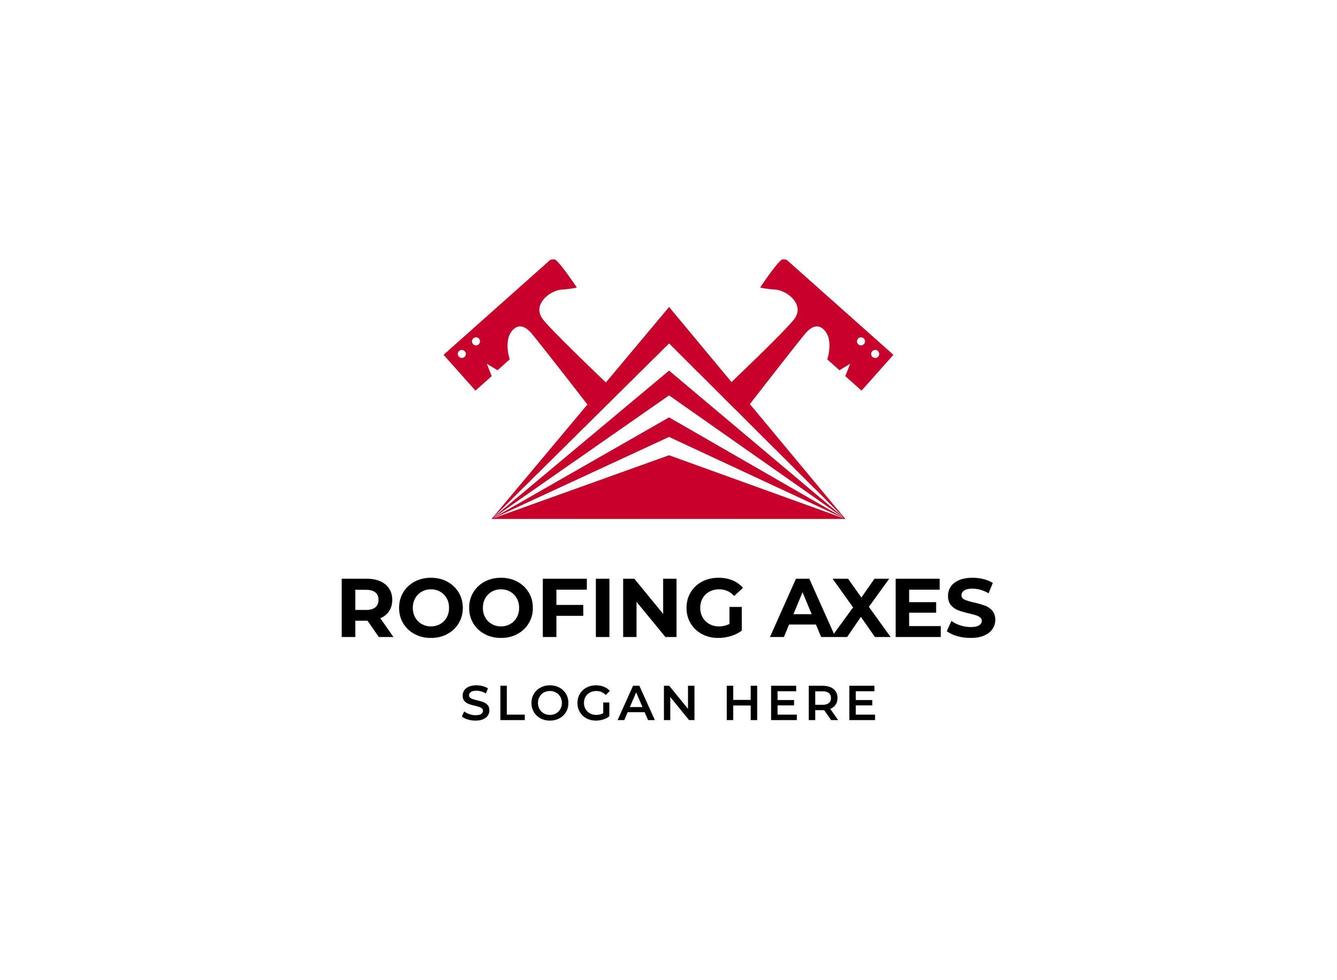 Roofing hatchets logo. House roof levels triangle with two crossed carpenter axes logotype. Construction or building company branding symbol vector